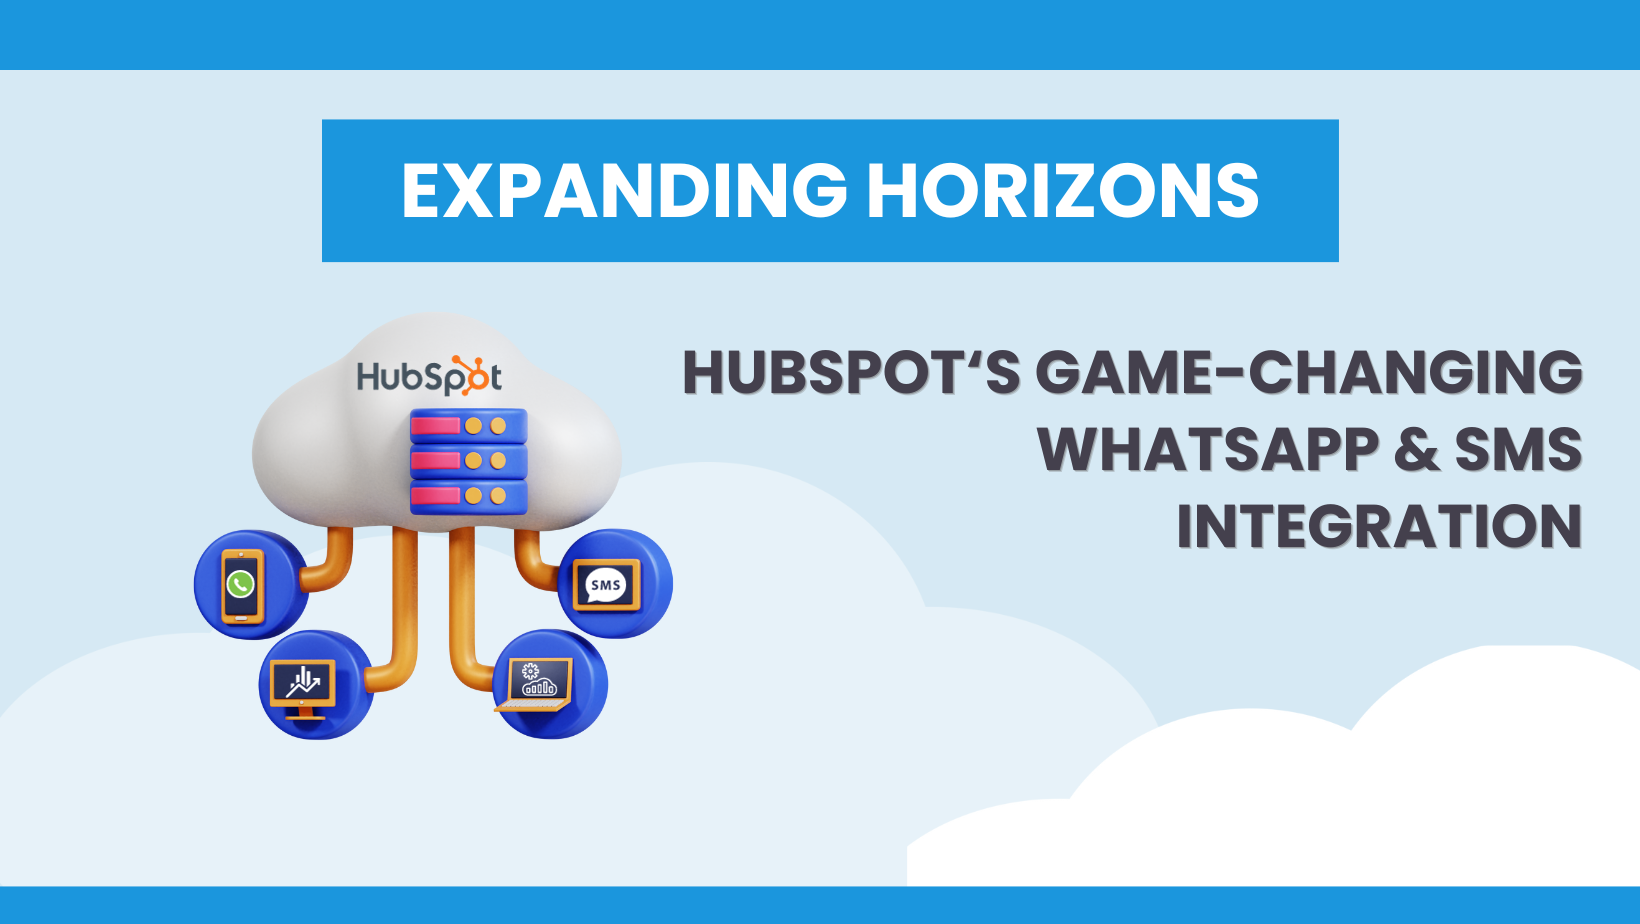 HubSpot's Game-Changing WhatsApp & SMS Integrations: Expanding Horizons